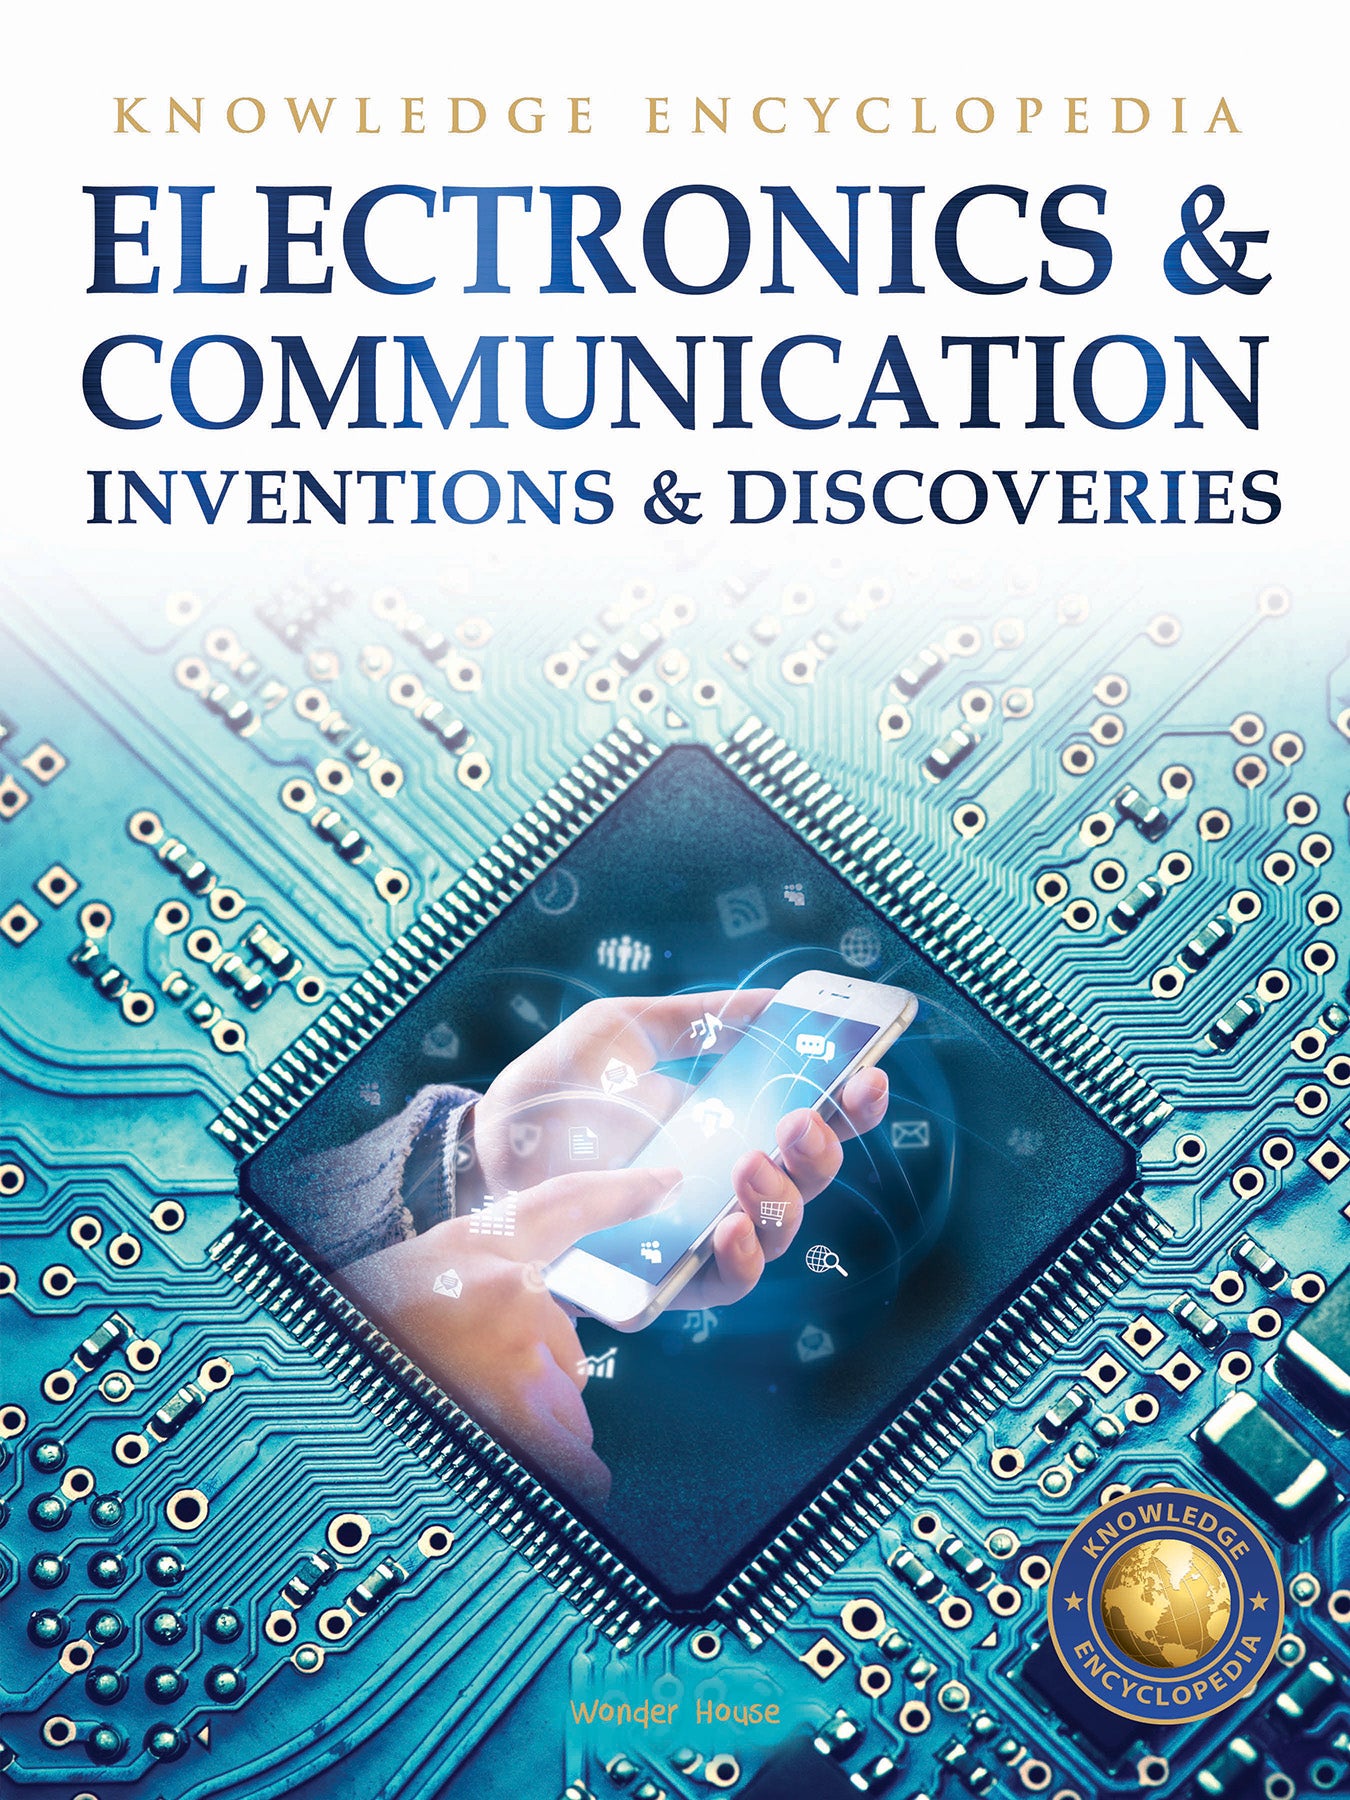 Knowledge　at　Online　Discoveries　For　Book　Children　Encyclopedia　Inventions　Communication:　Electronics　available